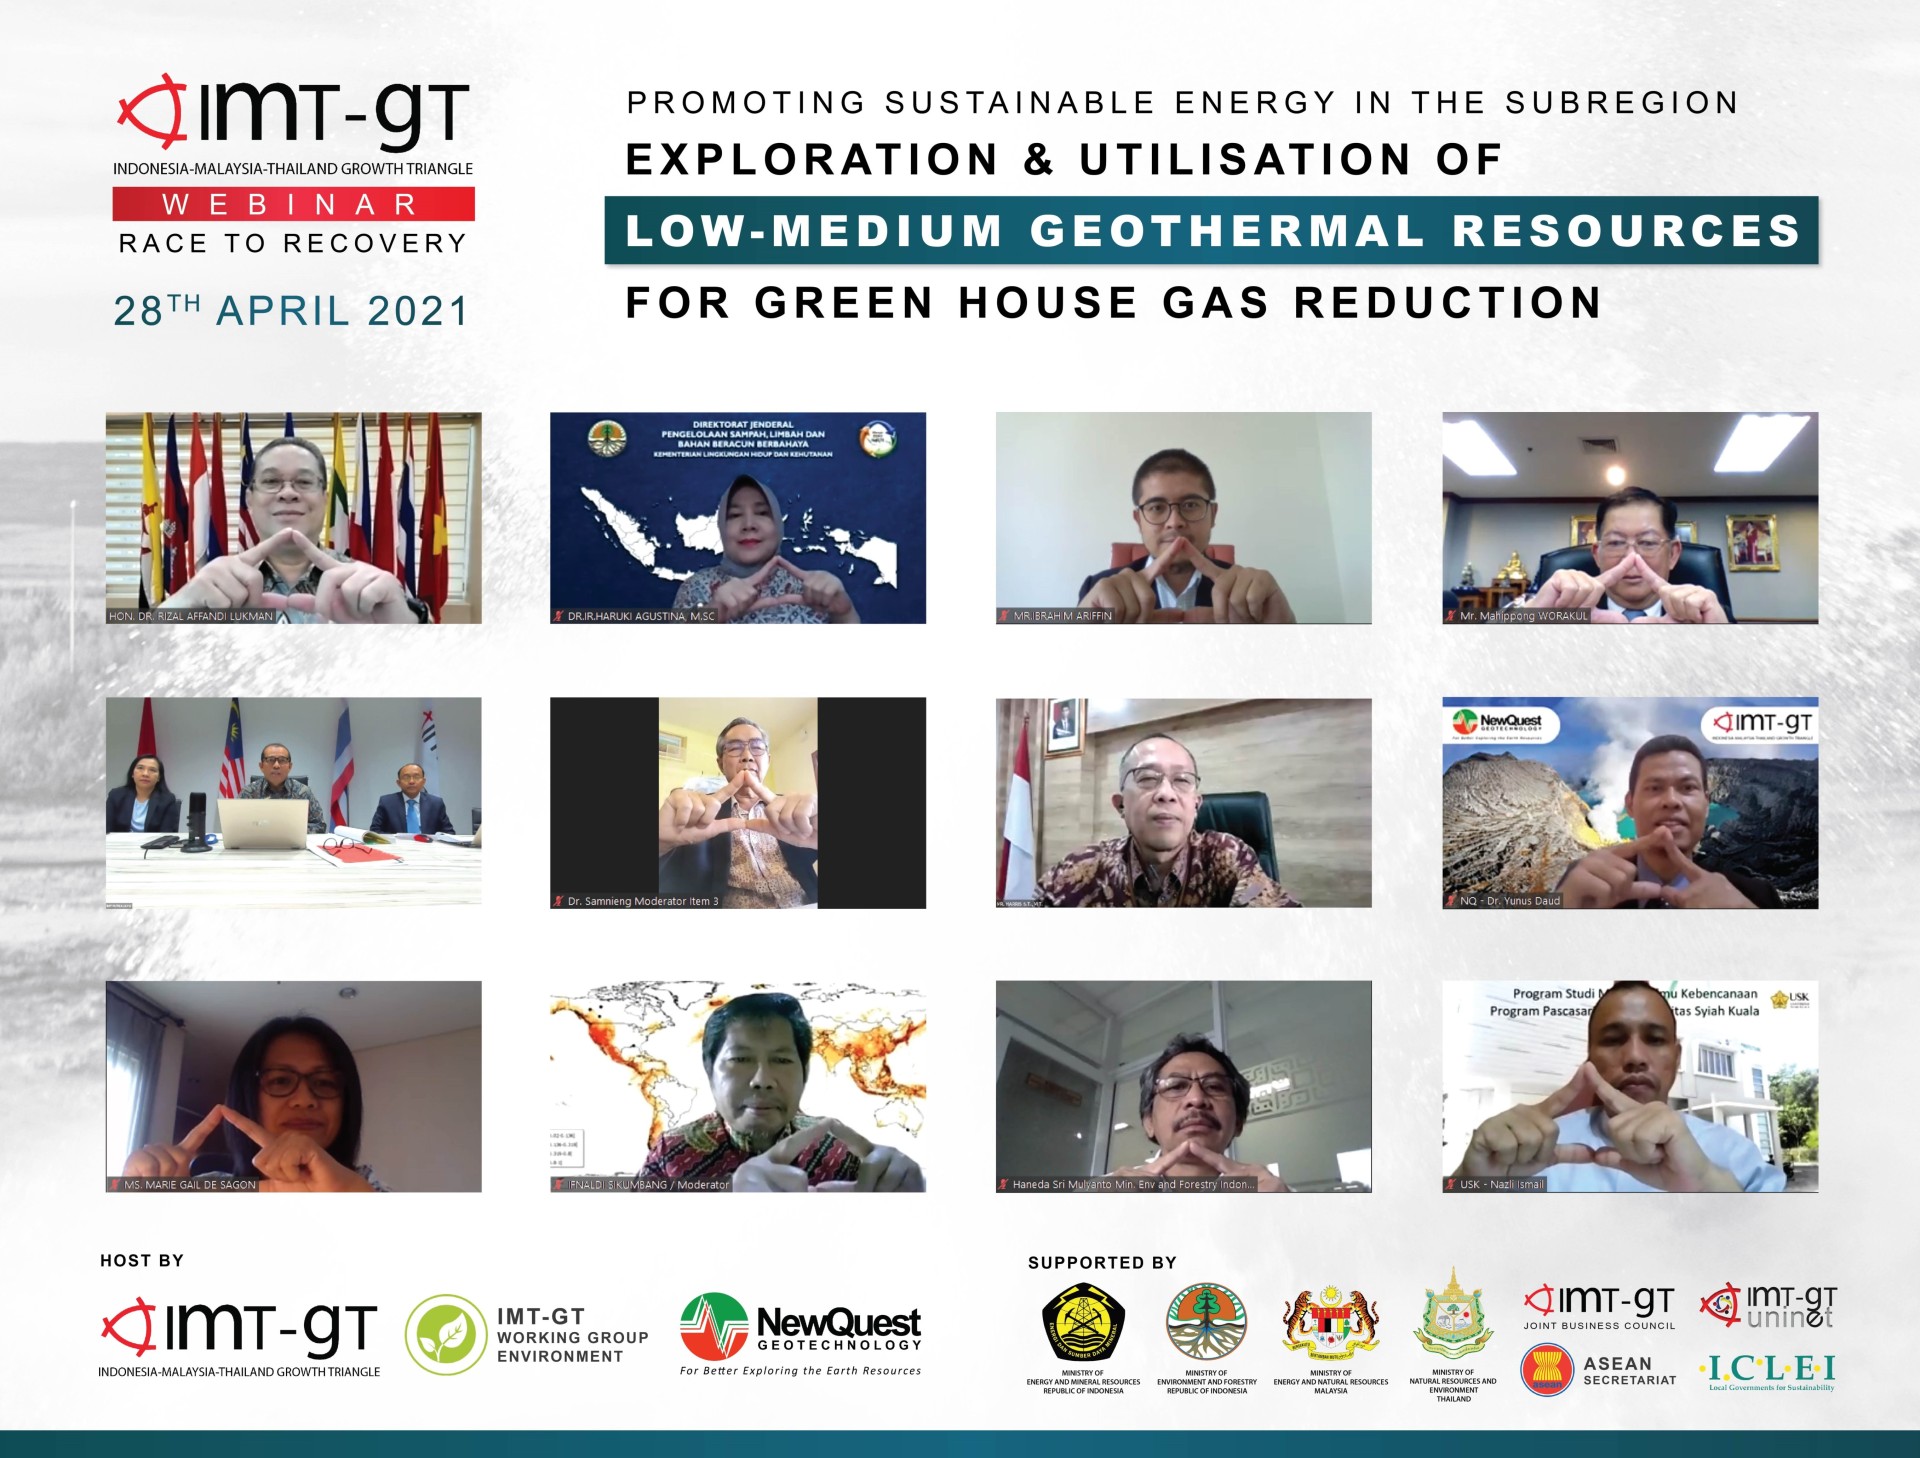 IMT-GT WEBINAR | PROMOTING SUSTAINABLE ENERGY IN THE SUBREGION: EXPLORATION AND UTILISATION OF LOW-MEDIUM GEOTHERMAL RESOURCES FOR GREENHOUSE GAS (GHG) REDUCTION